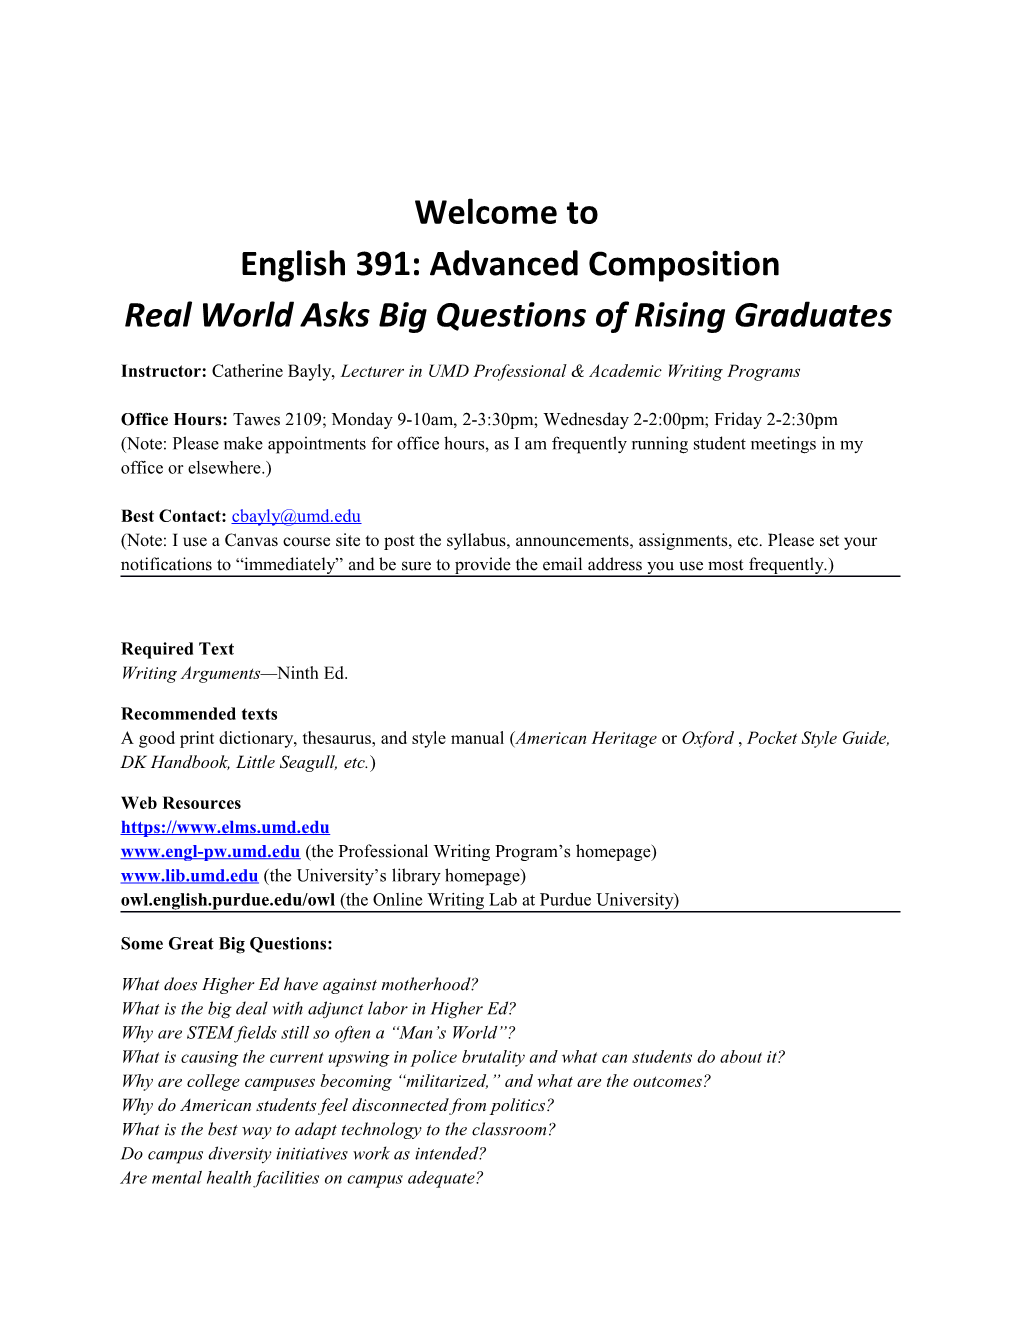 Welcome to English 391: Advanced Composition Real World Asks Big Questions of Rising Graduates